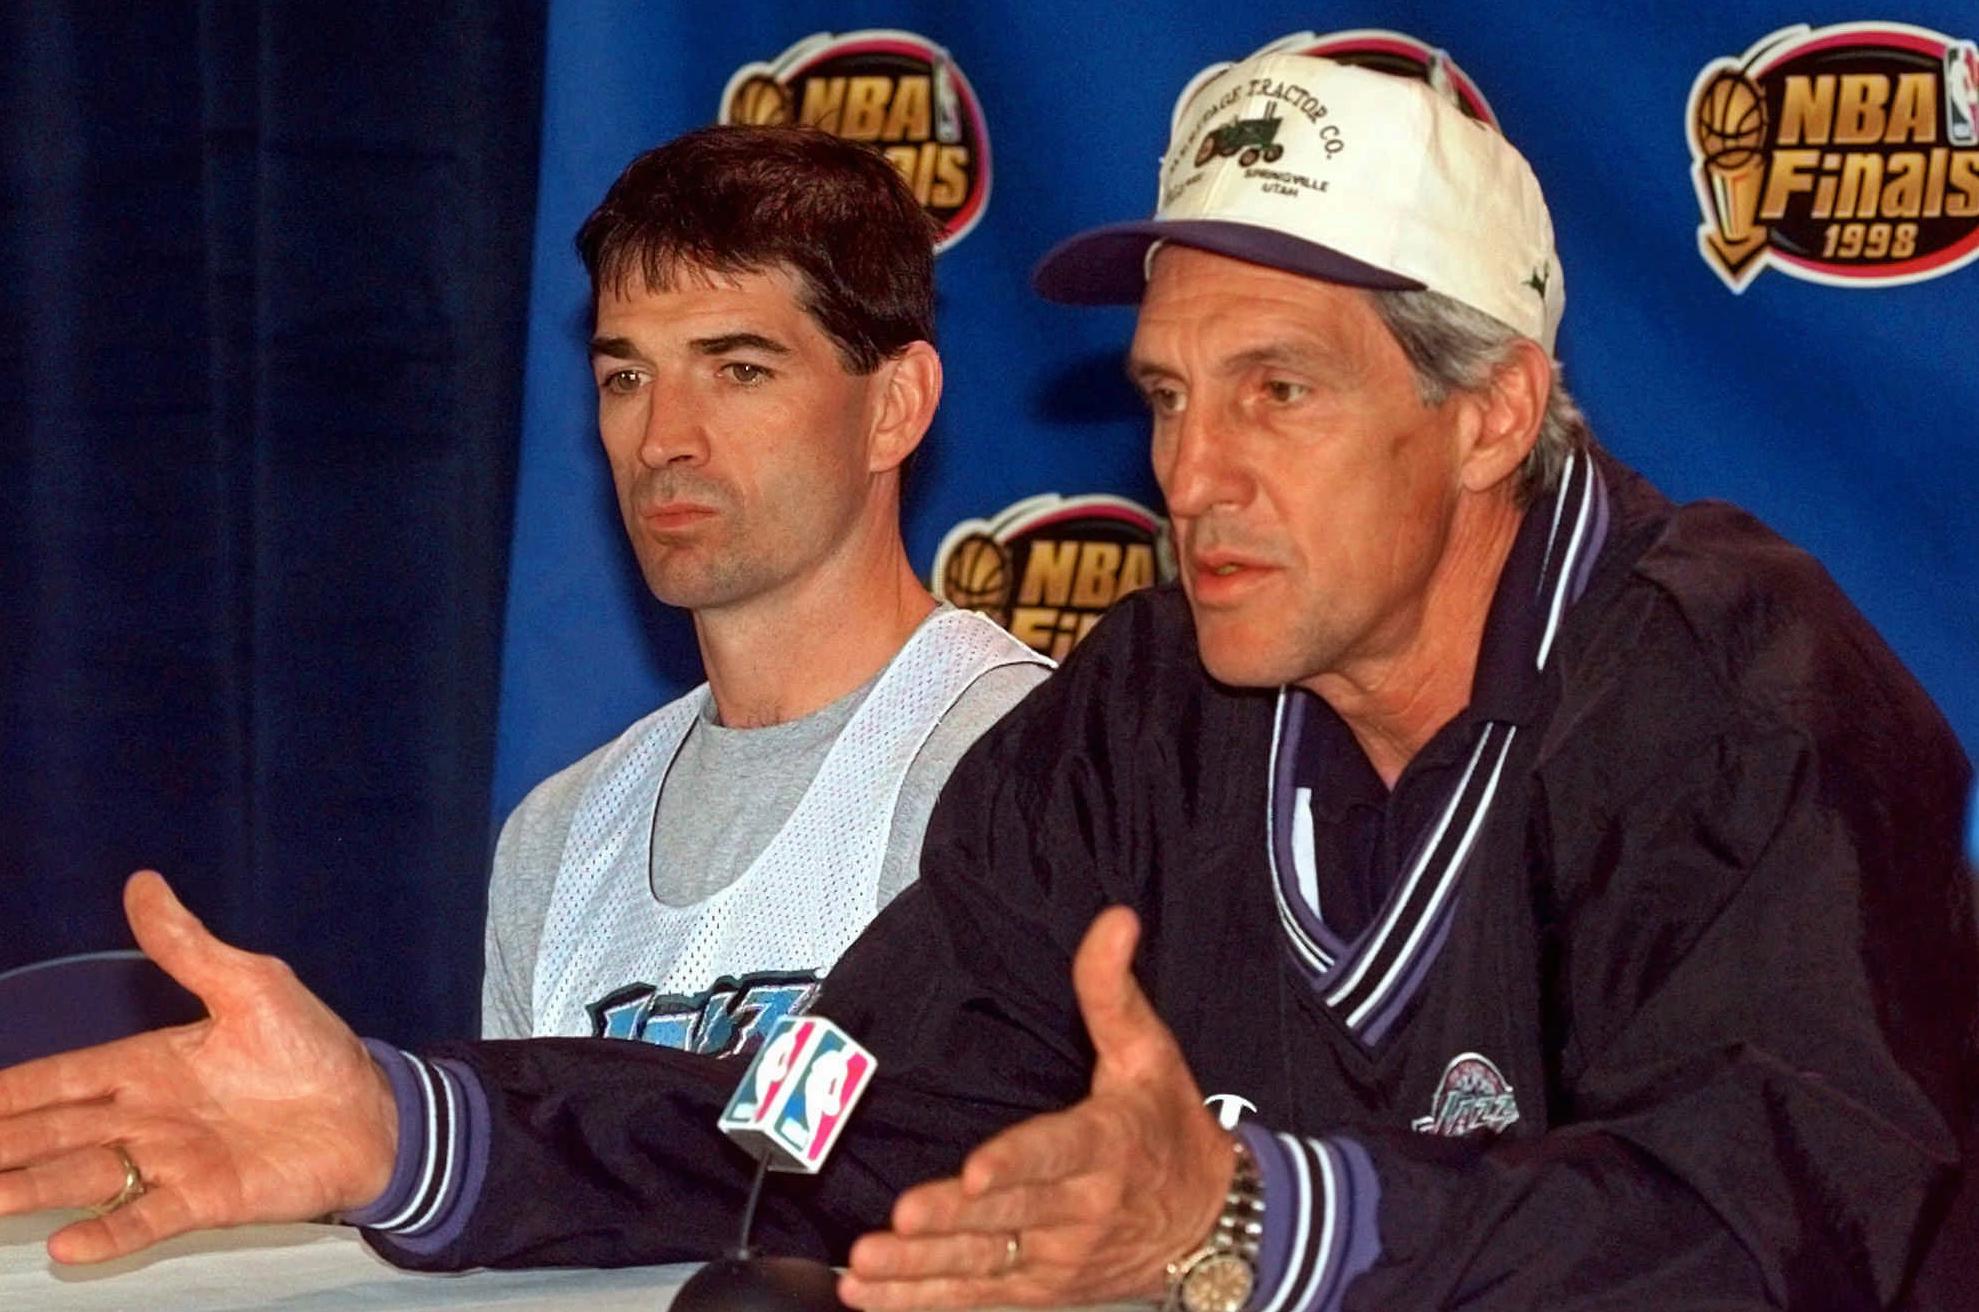 Jerry Sloan, Hall of Fame coach who guided John Stockton, Jazz to ...